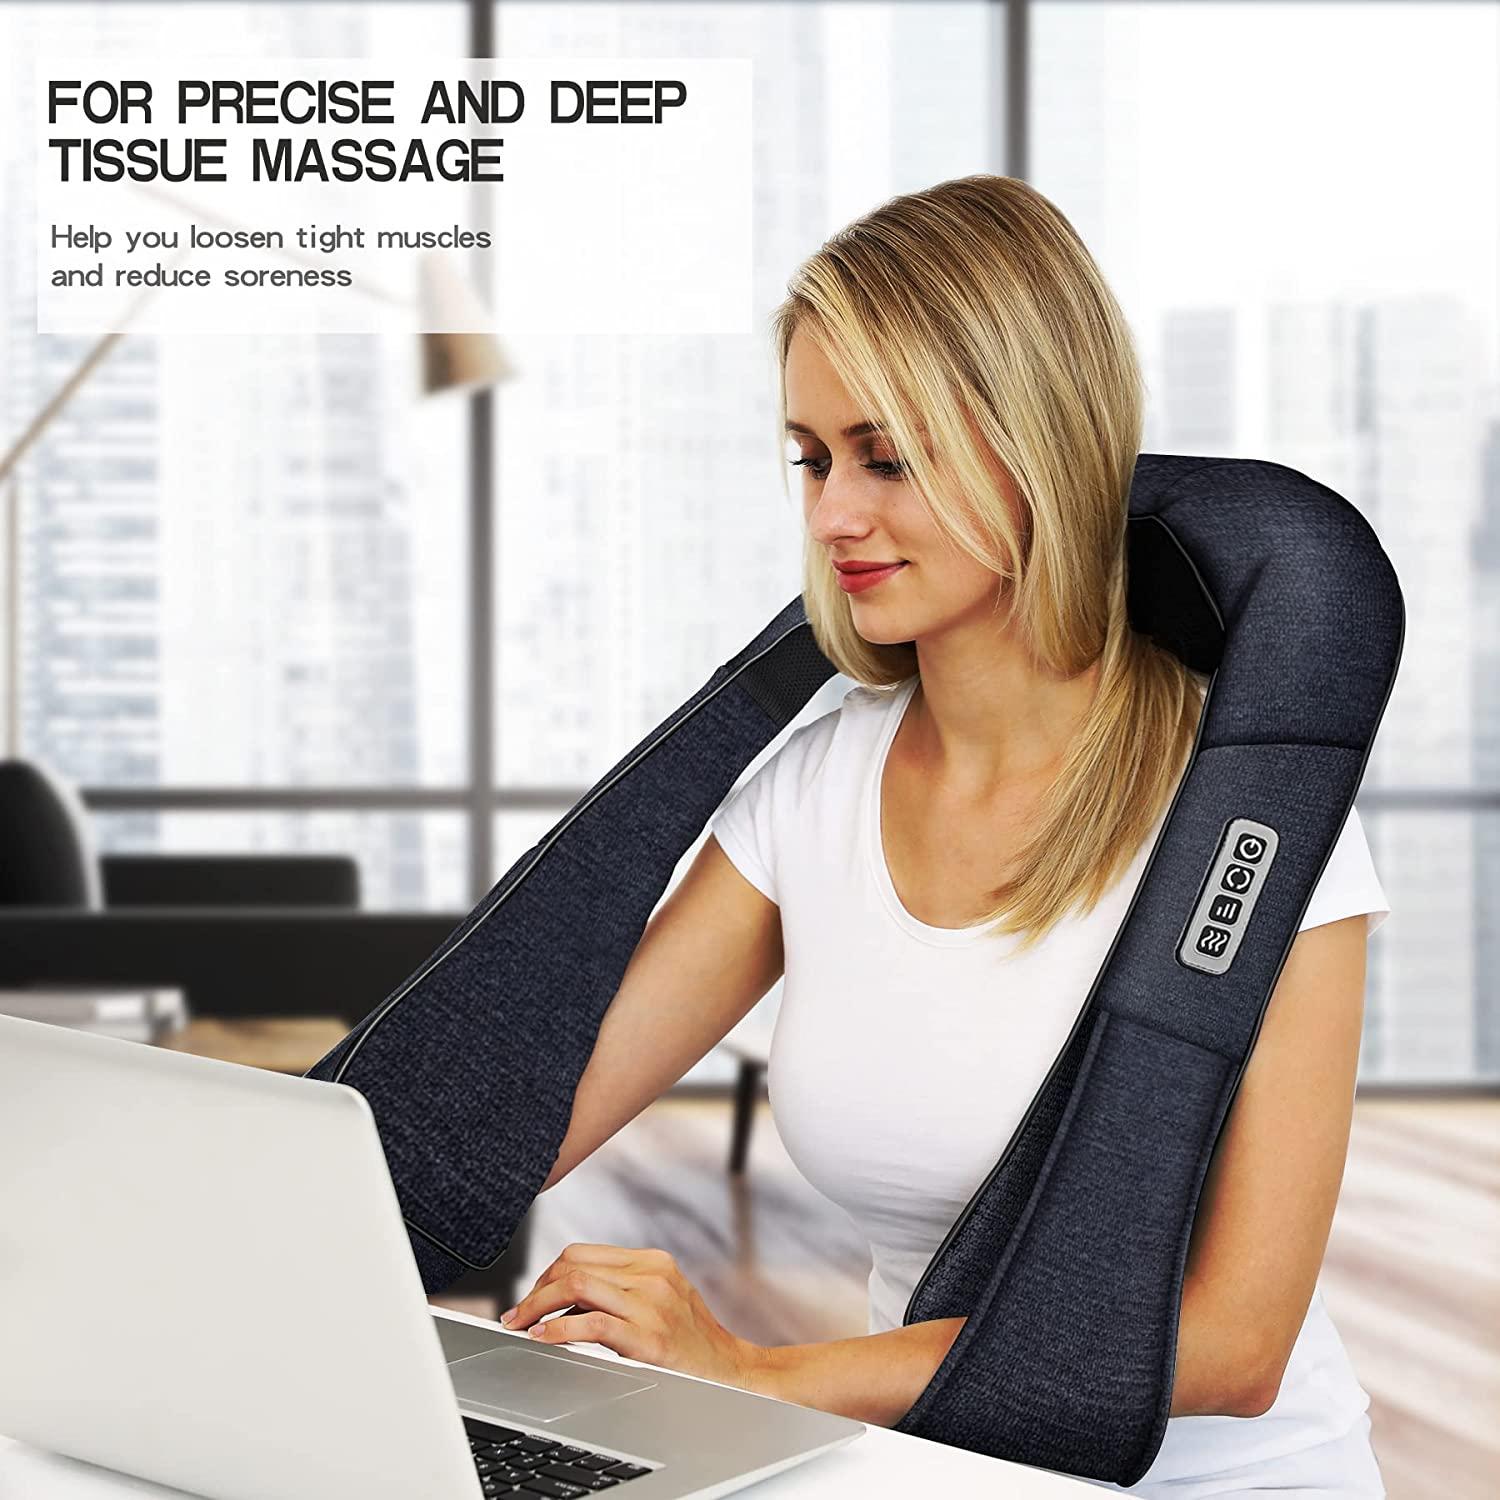 MoCuishle Shiatsu Back Shoulder and Neck Massager with Heat, Electric Deep  Tissue 4D Kneading Massag…See more MoCuishle Shiatsu Back Shoulder and Neck